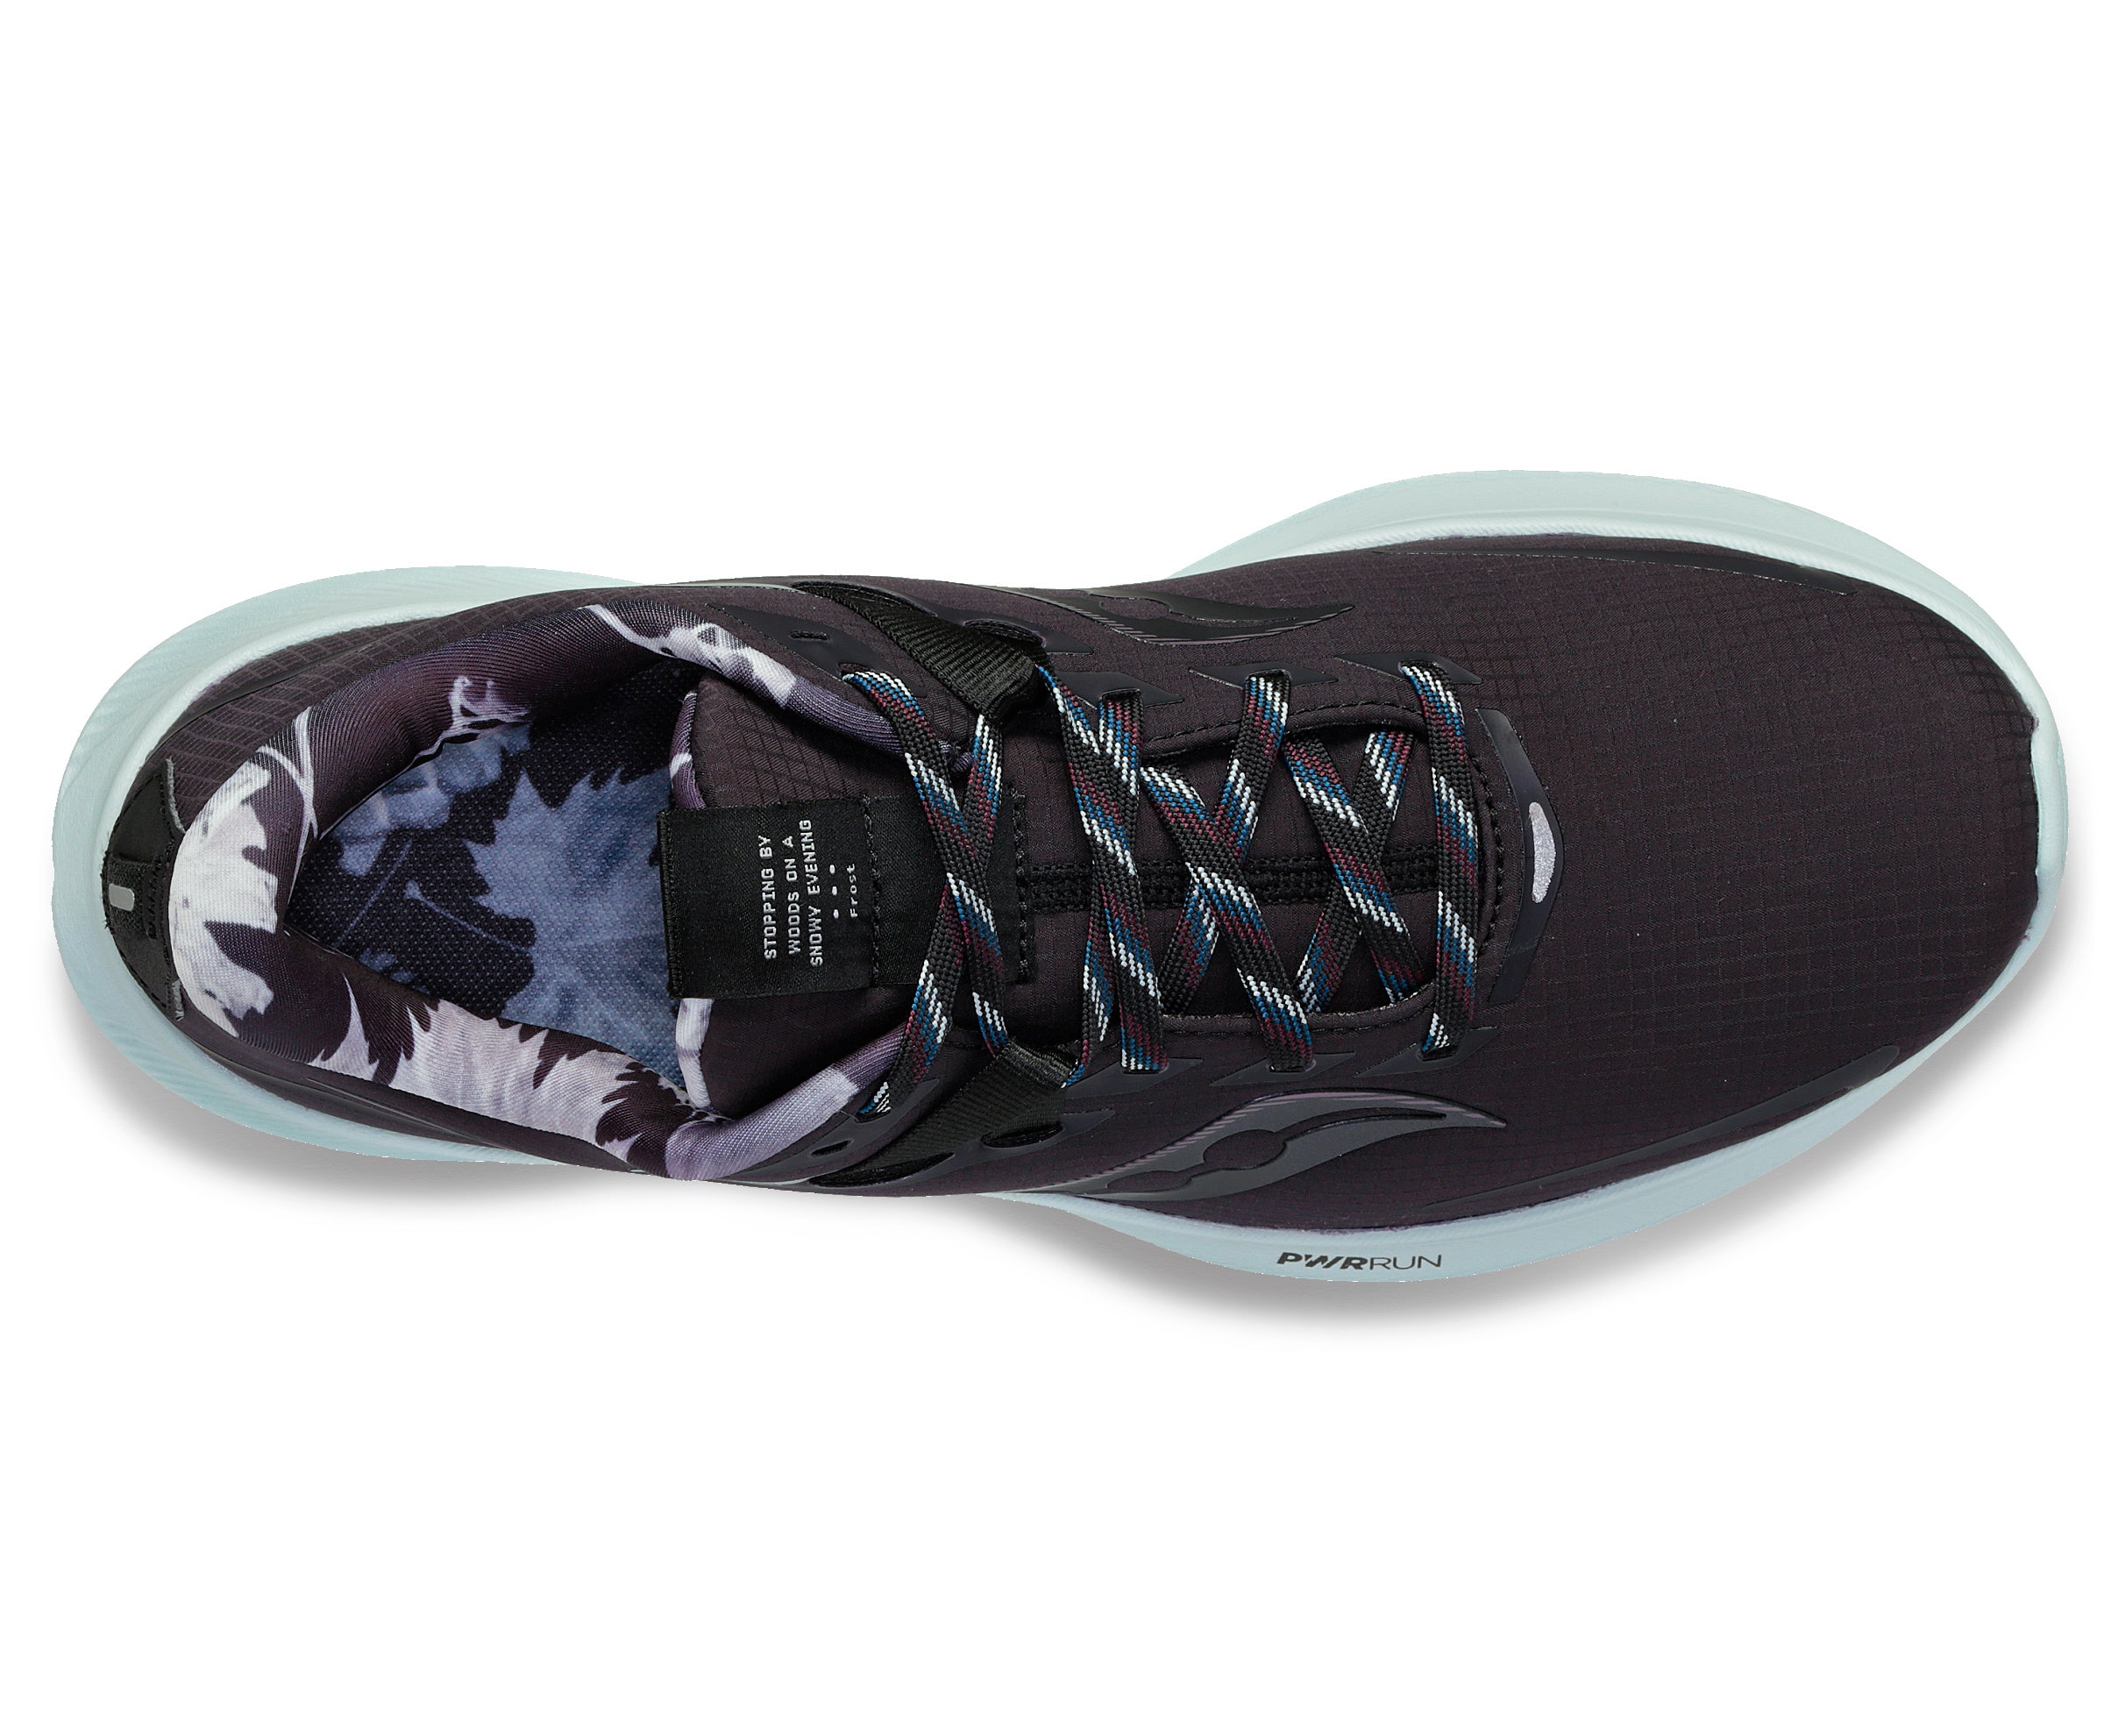 SAUCONY RIDE 15 RUNSHIELD FROST - MILES TO GO